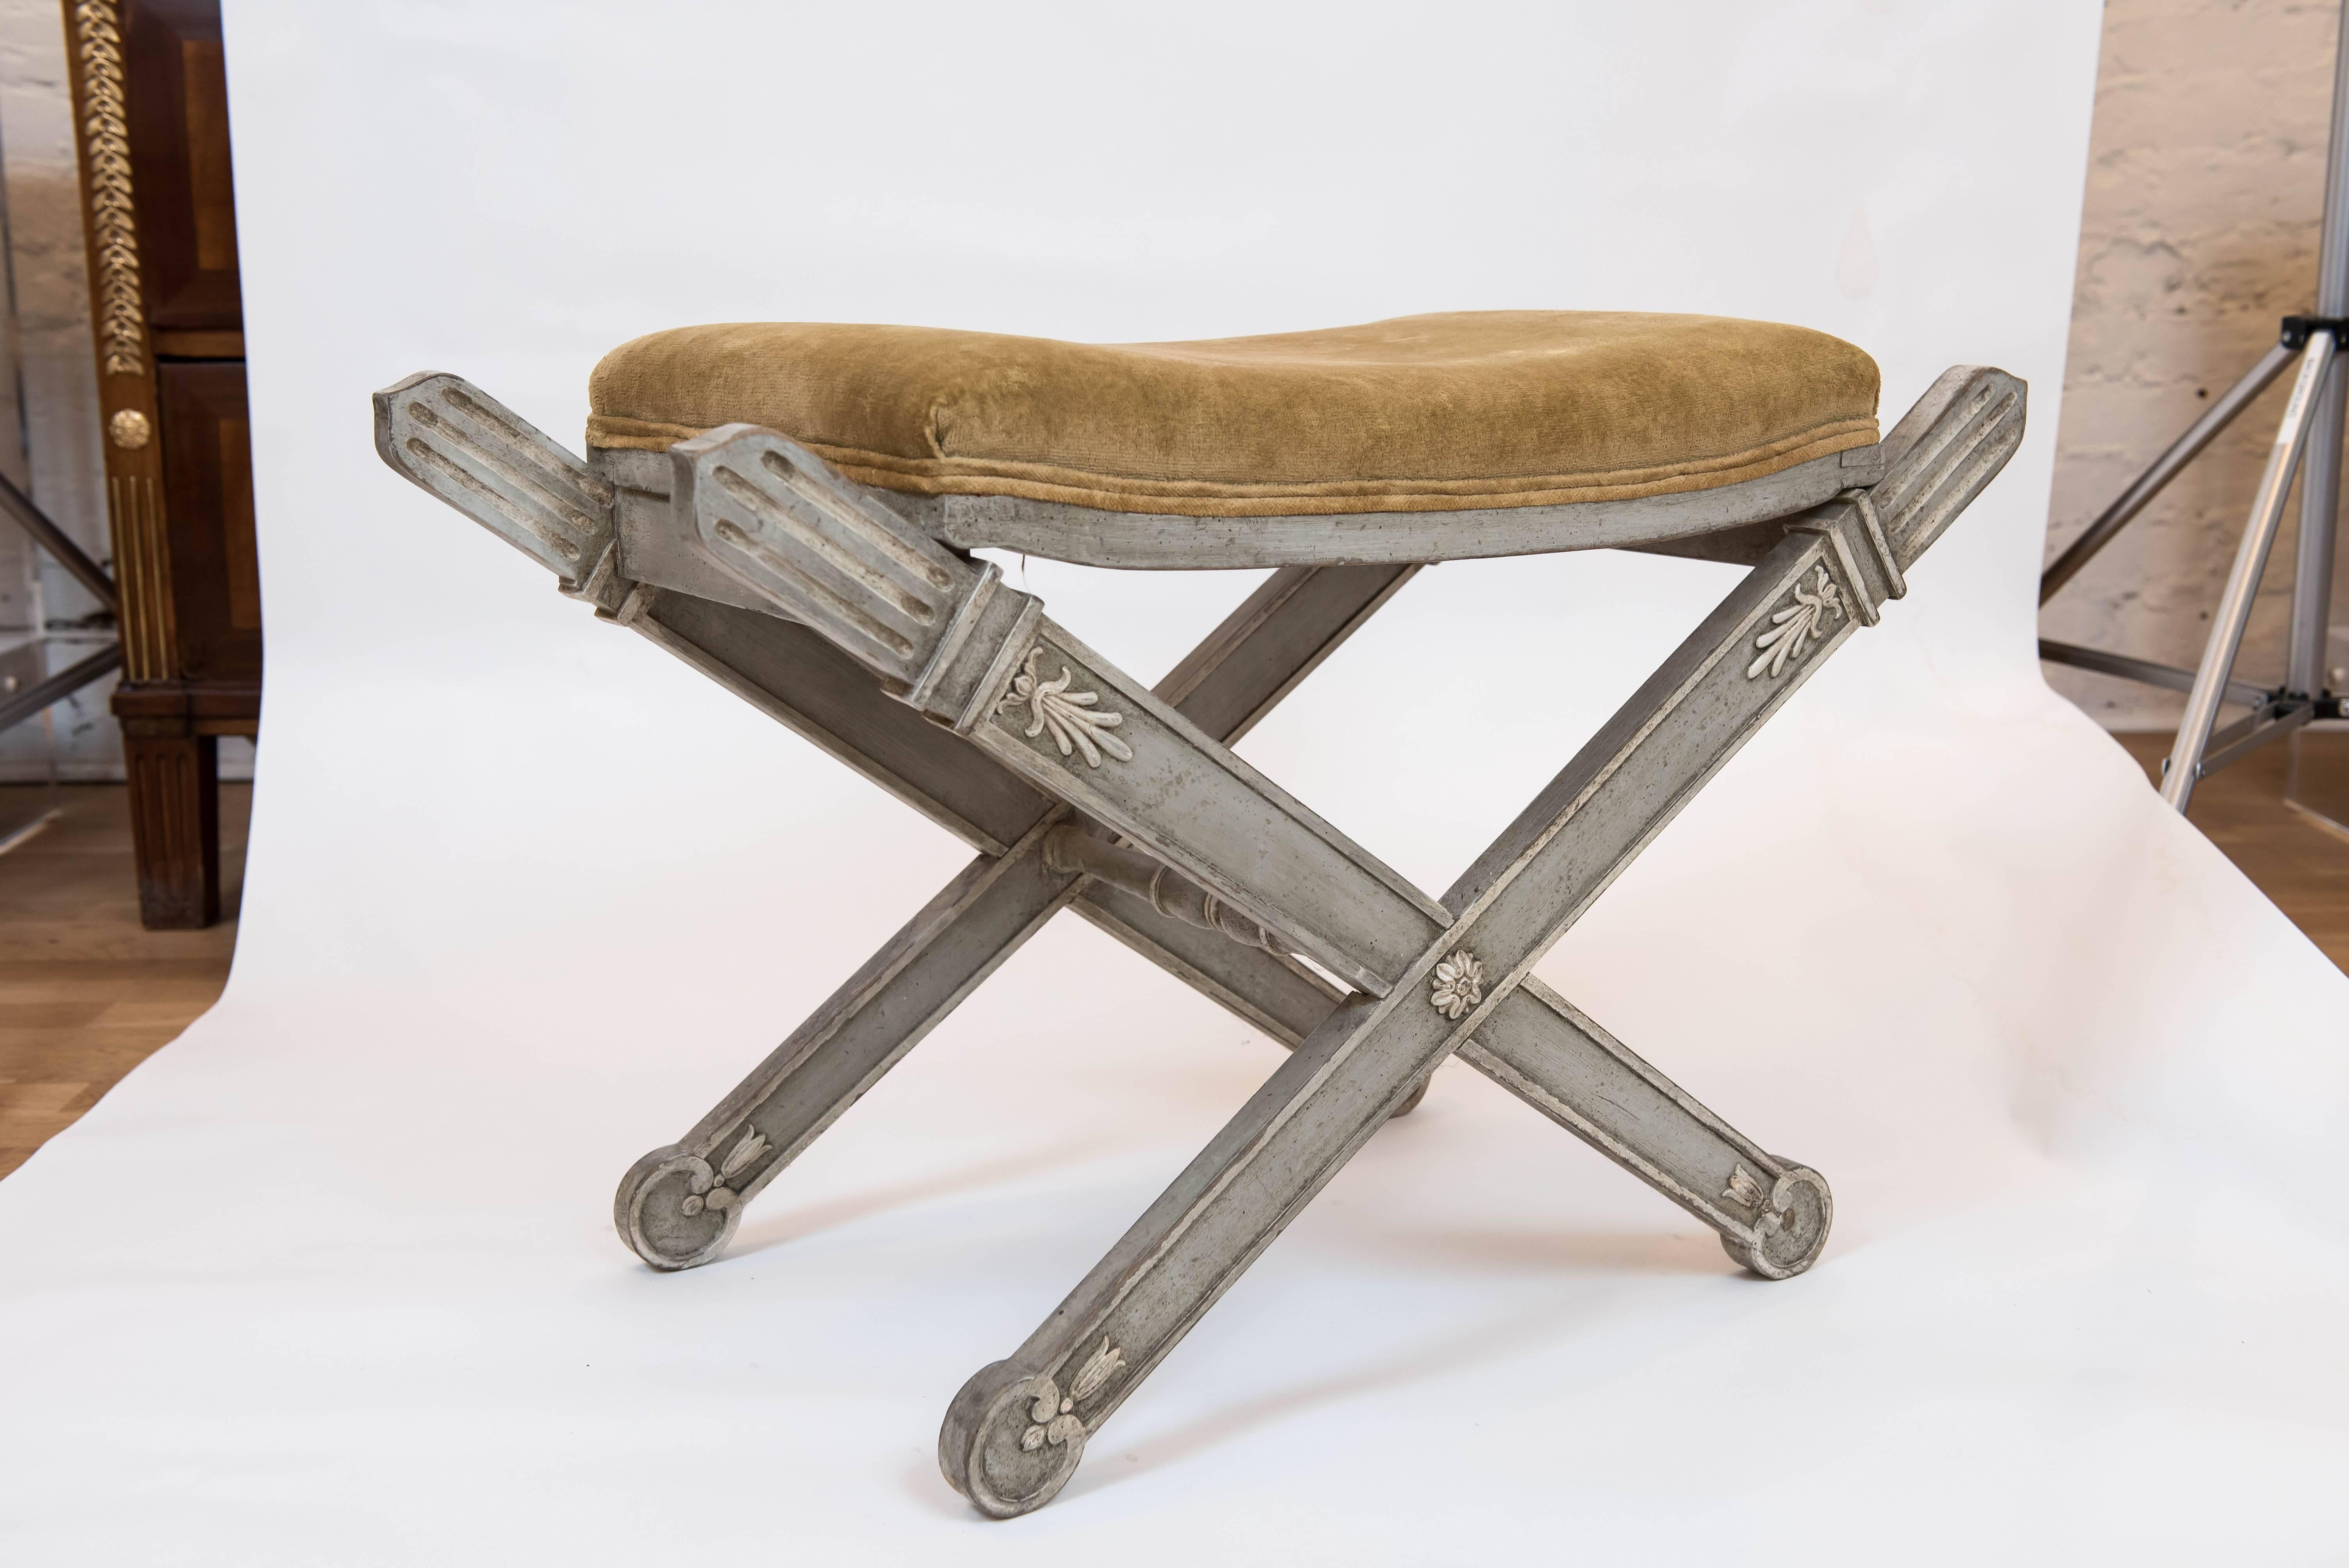 A highly decorative and beautiful grey-green neoclassical X-form bench with distressed white painted accents.
The upholstery is a 